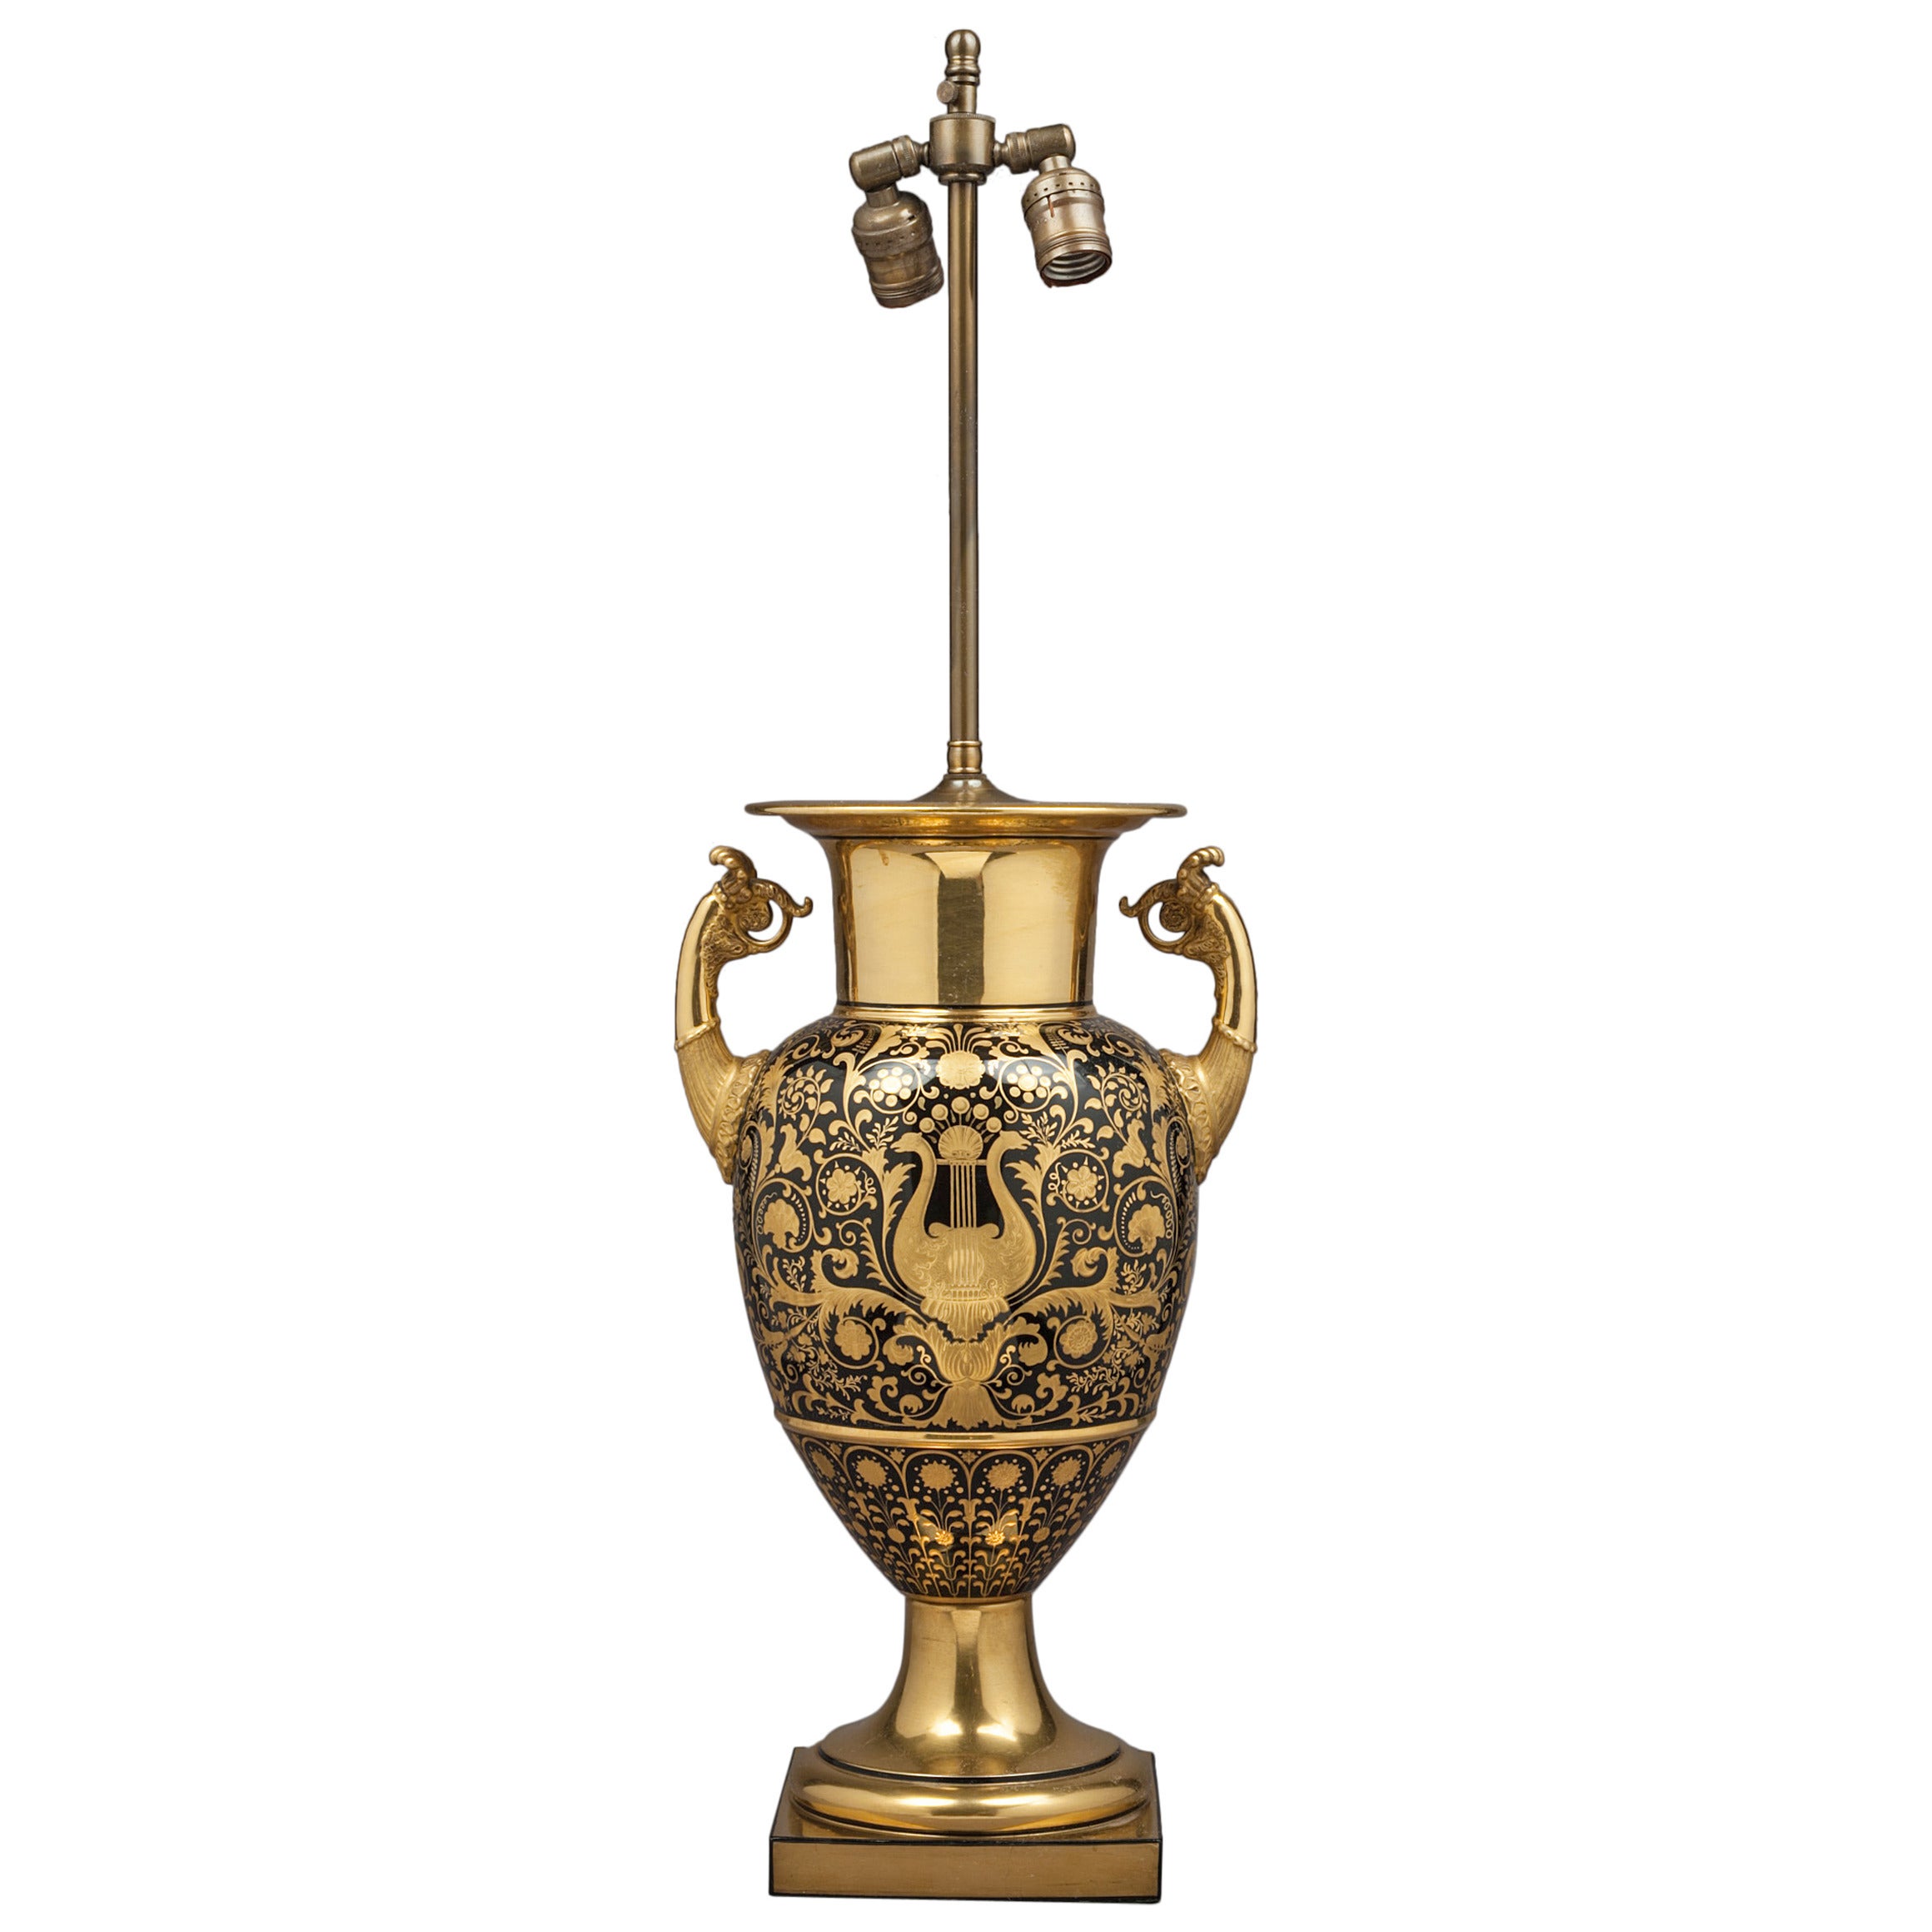 Berlin Blue and Gold Vase Mounted as Lamp, circa 1820